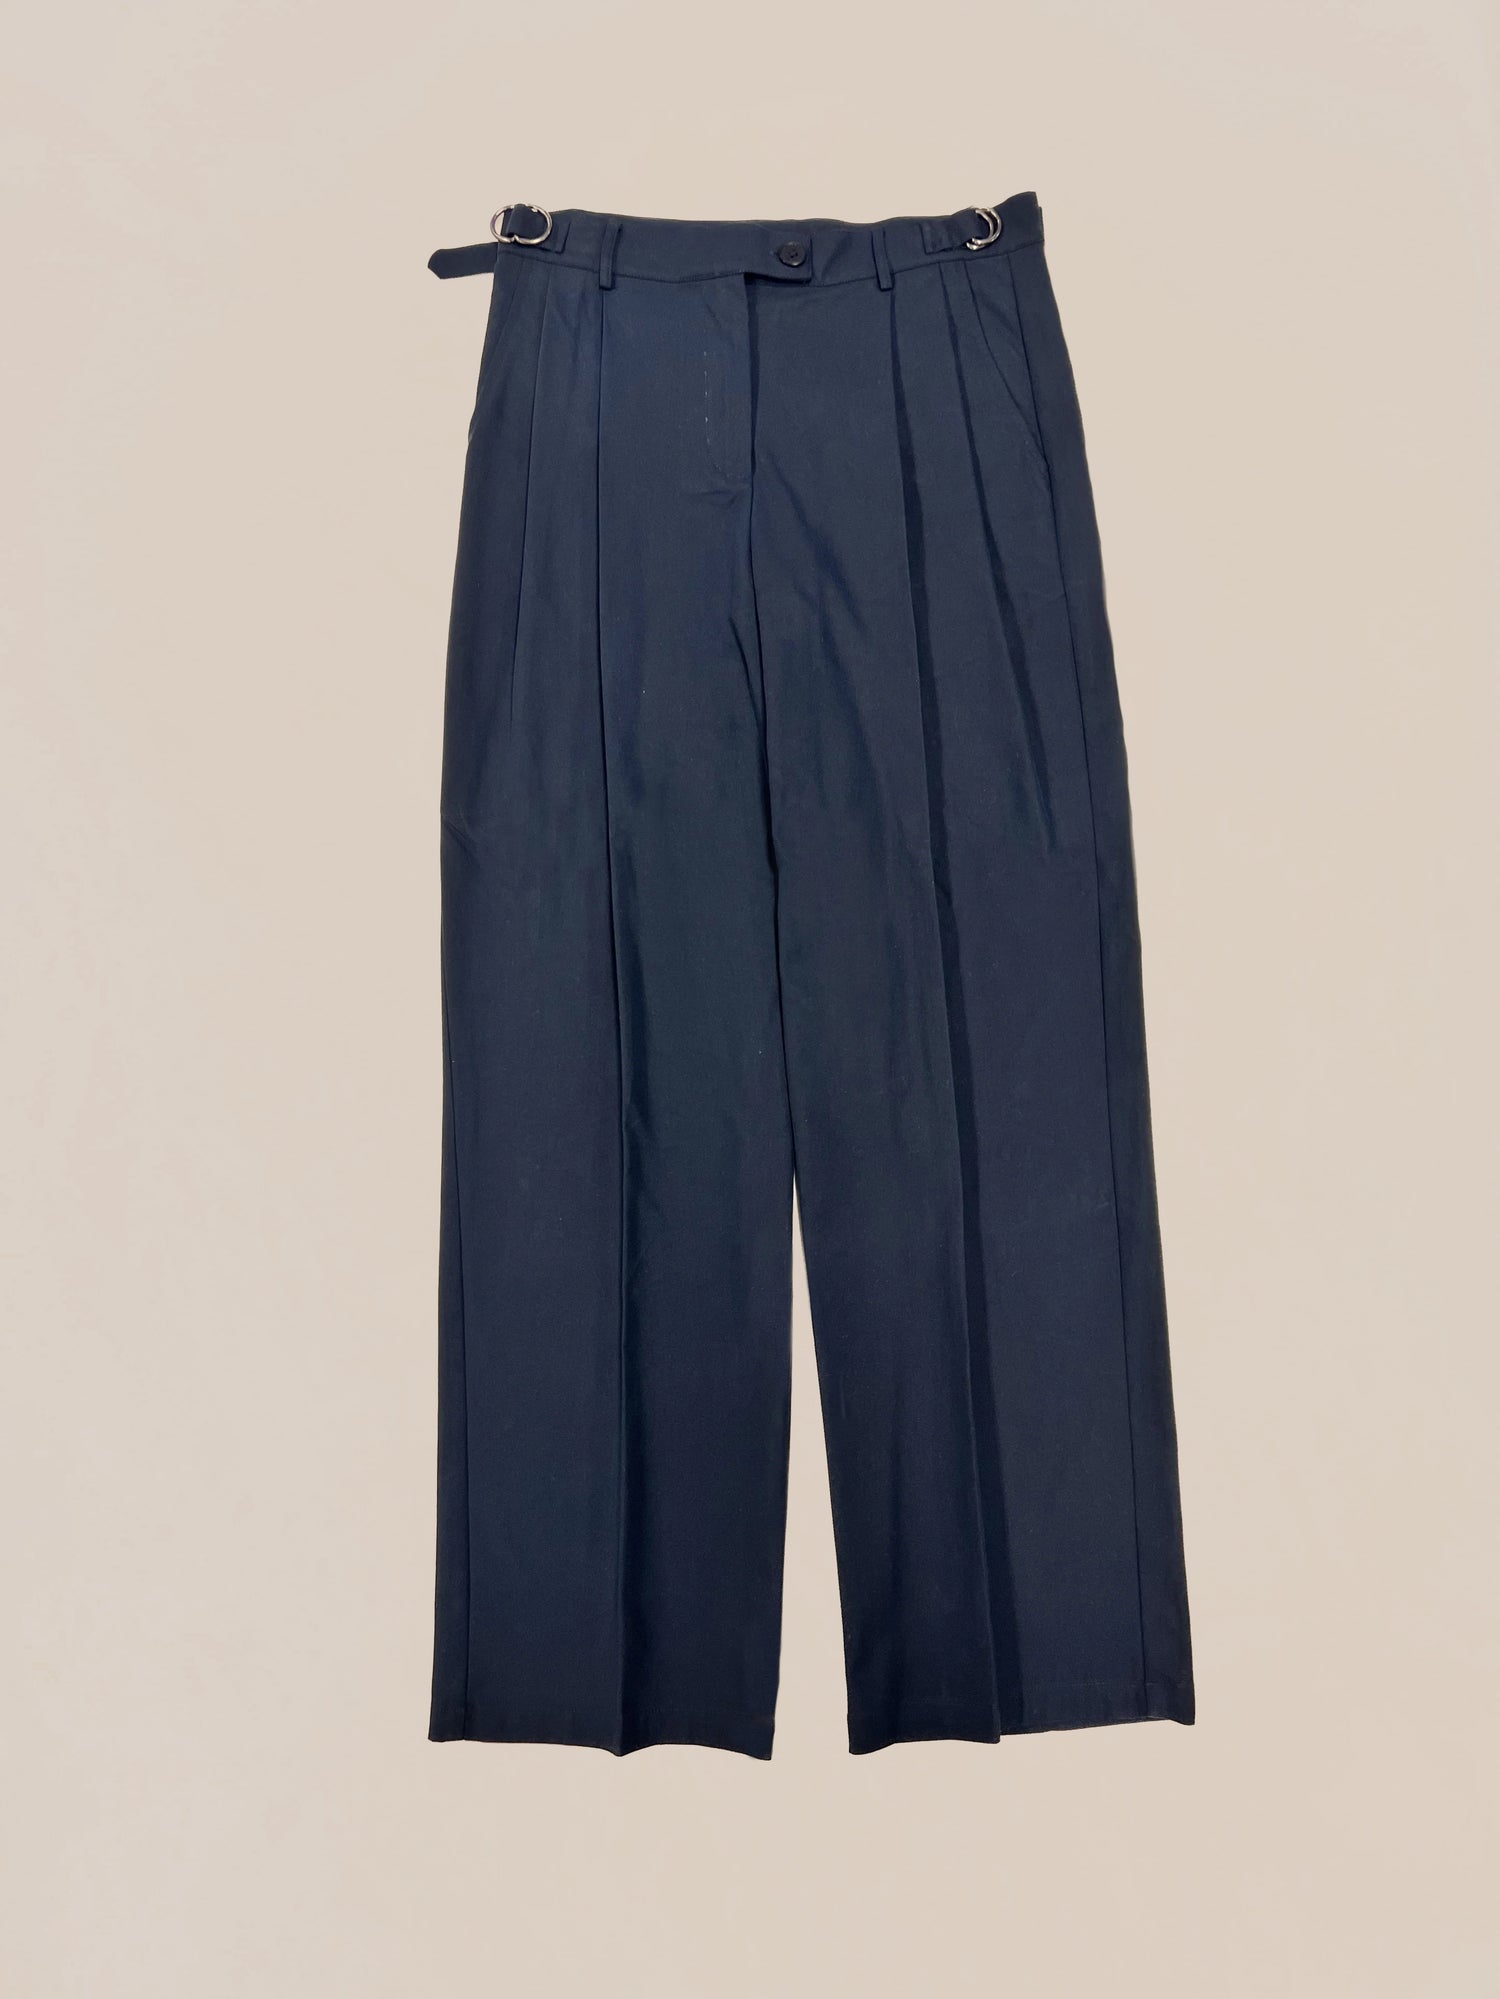 Profound's Sample 36 Navy pleated cotton trousers on a neutral background.